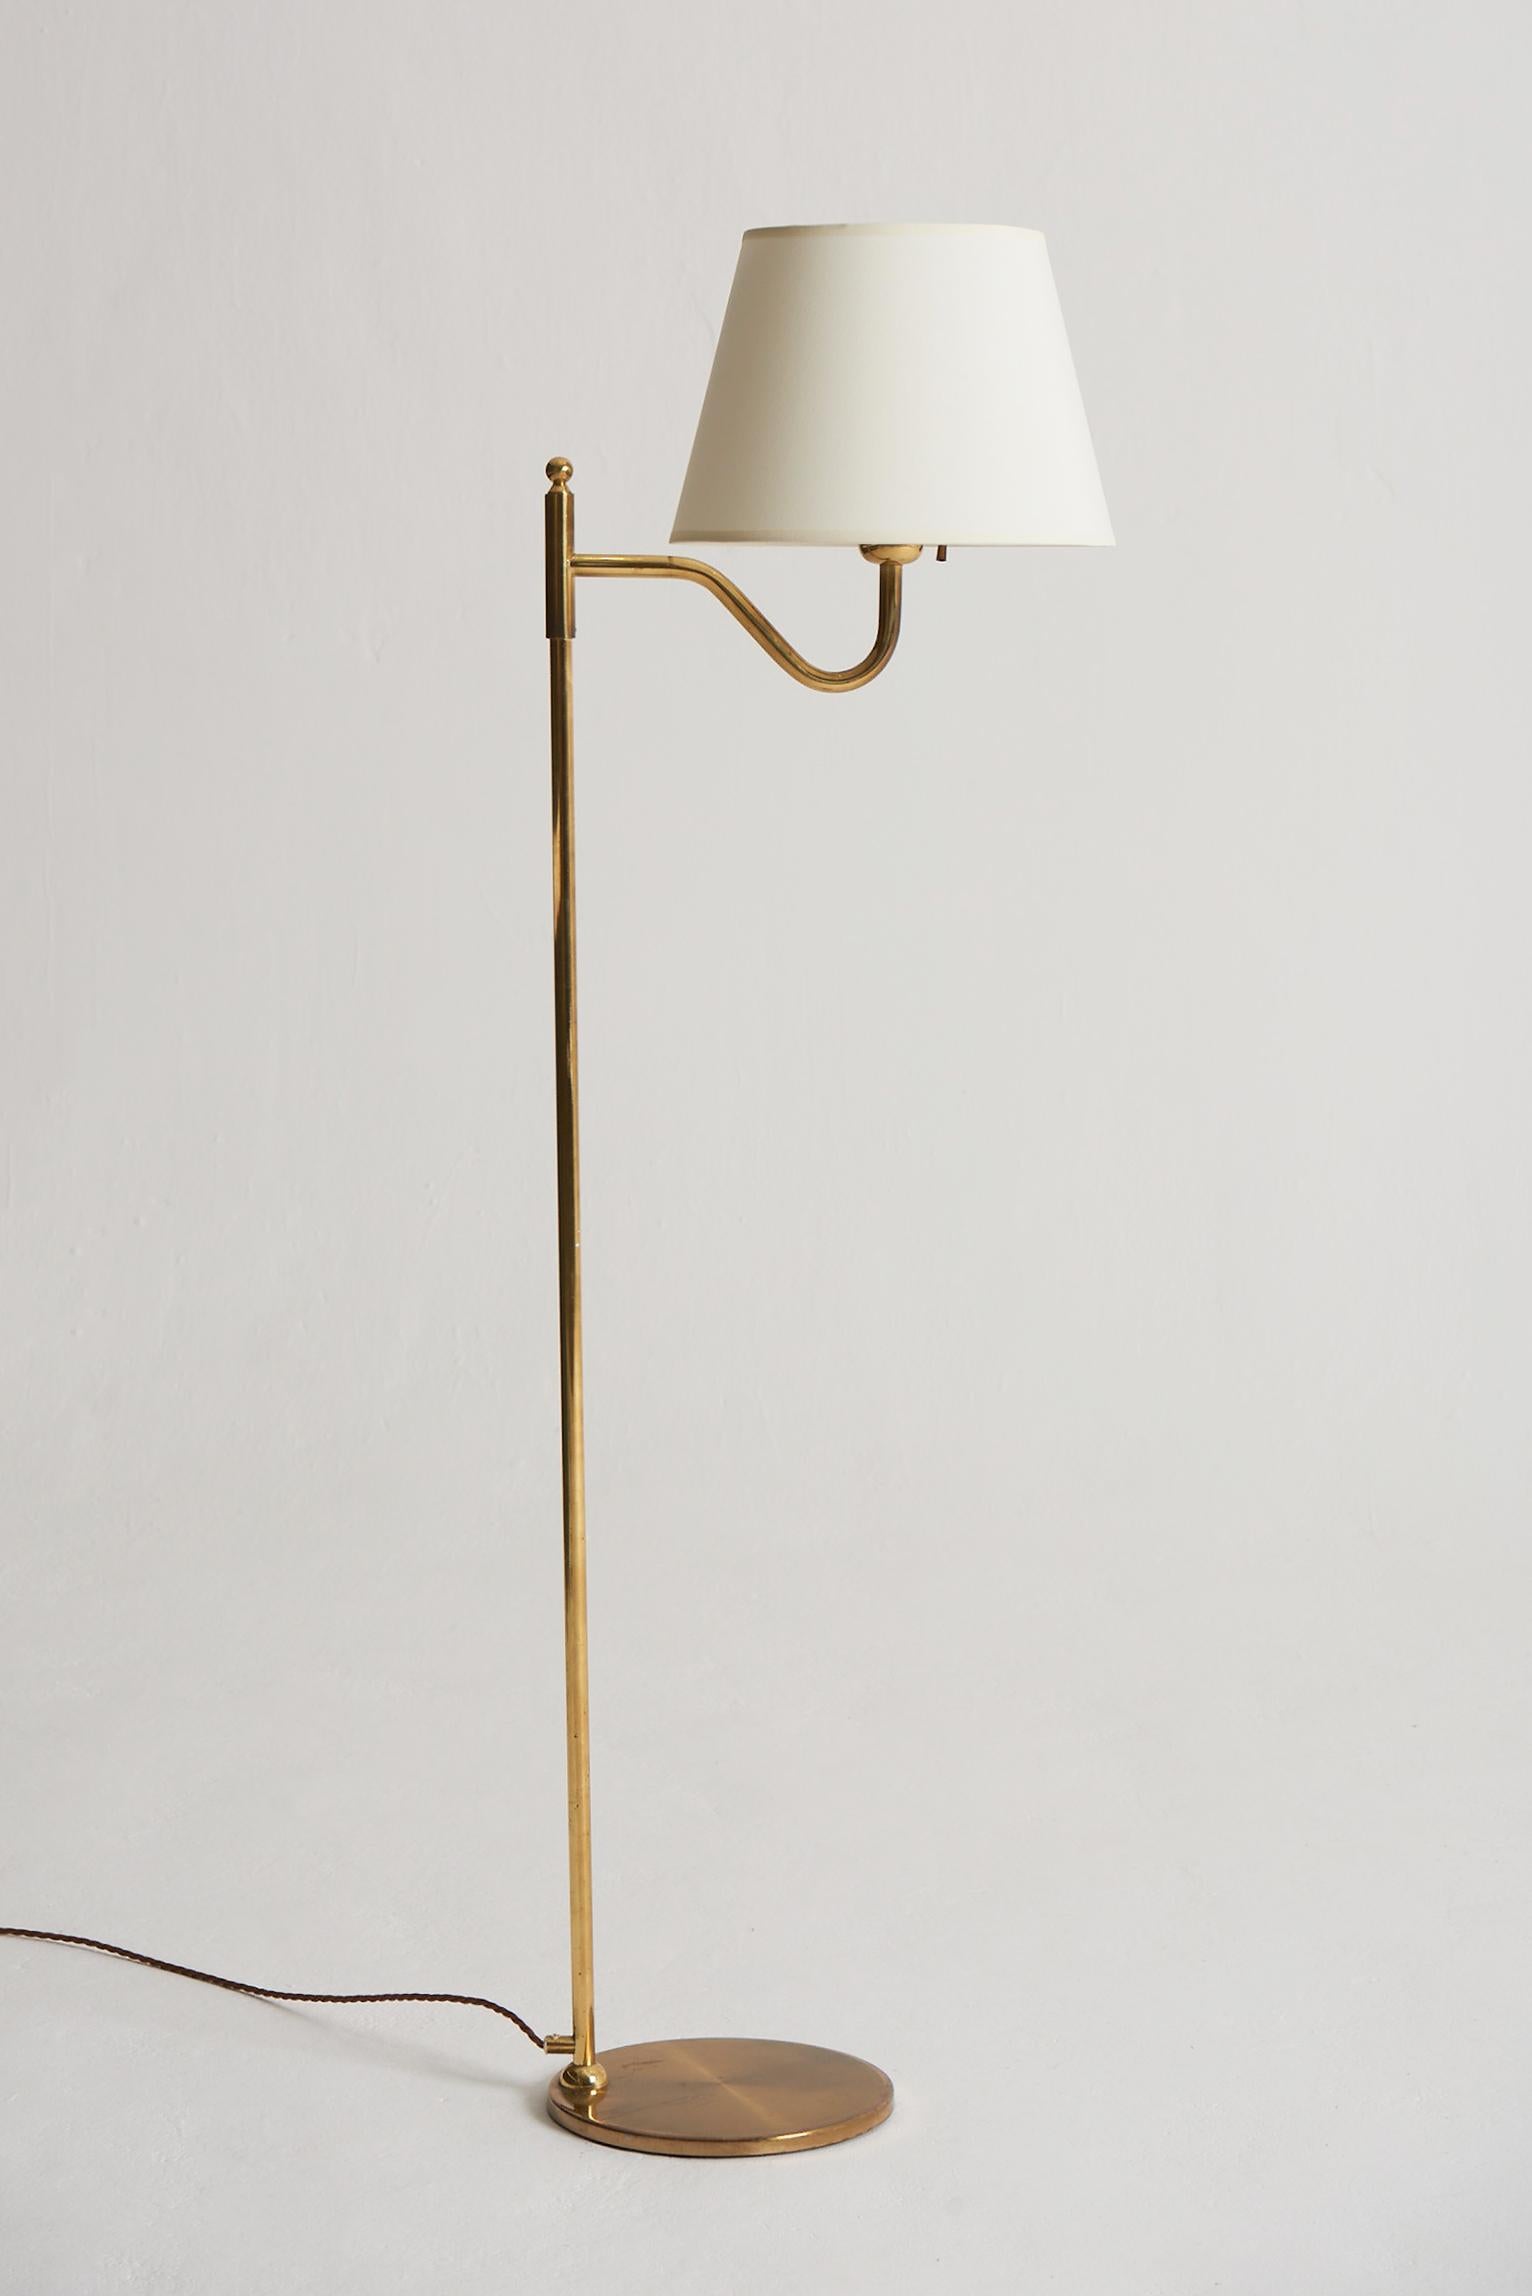 A brass reading floor lamp.
Sweden, third quarter of the 20th Century.
Measures: With the shade: 130.5 cm high.
Shade diameter: 30cm.
Lamp base only: 116 cm high by 24 cm diameter.